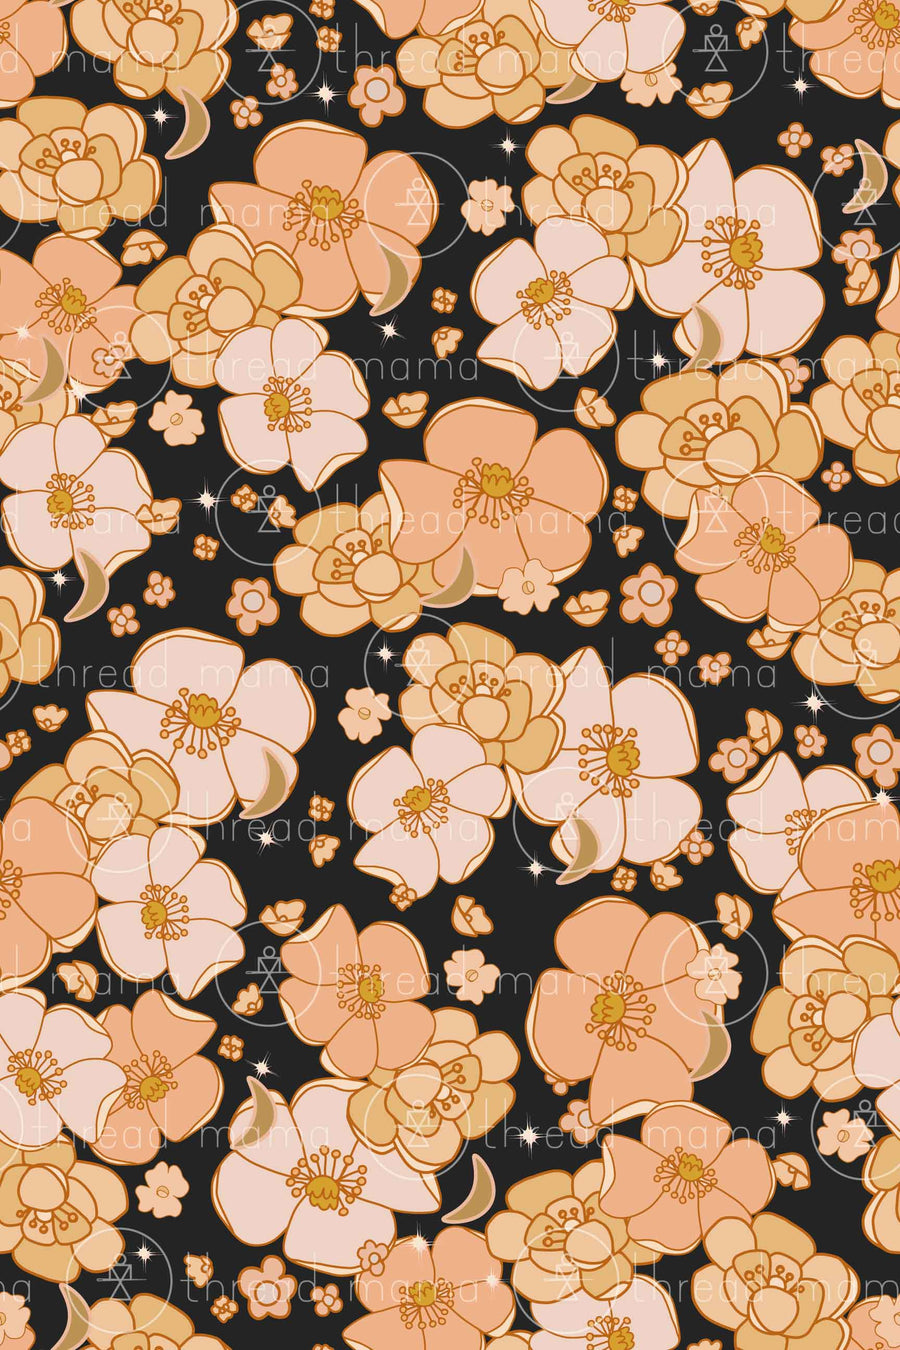 Repeating Pattern #21 (Seamless)